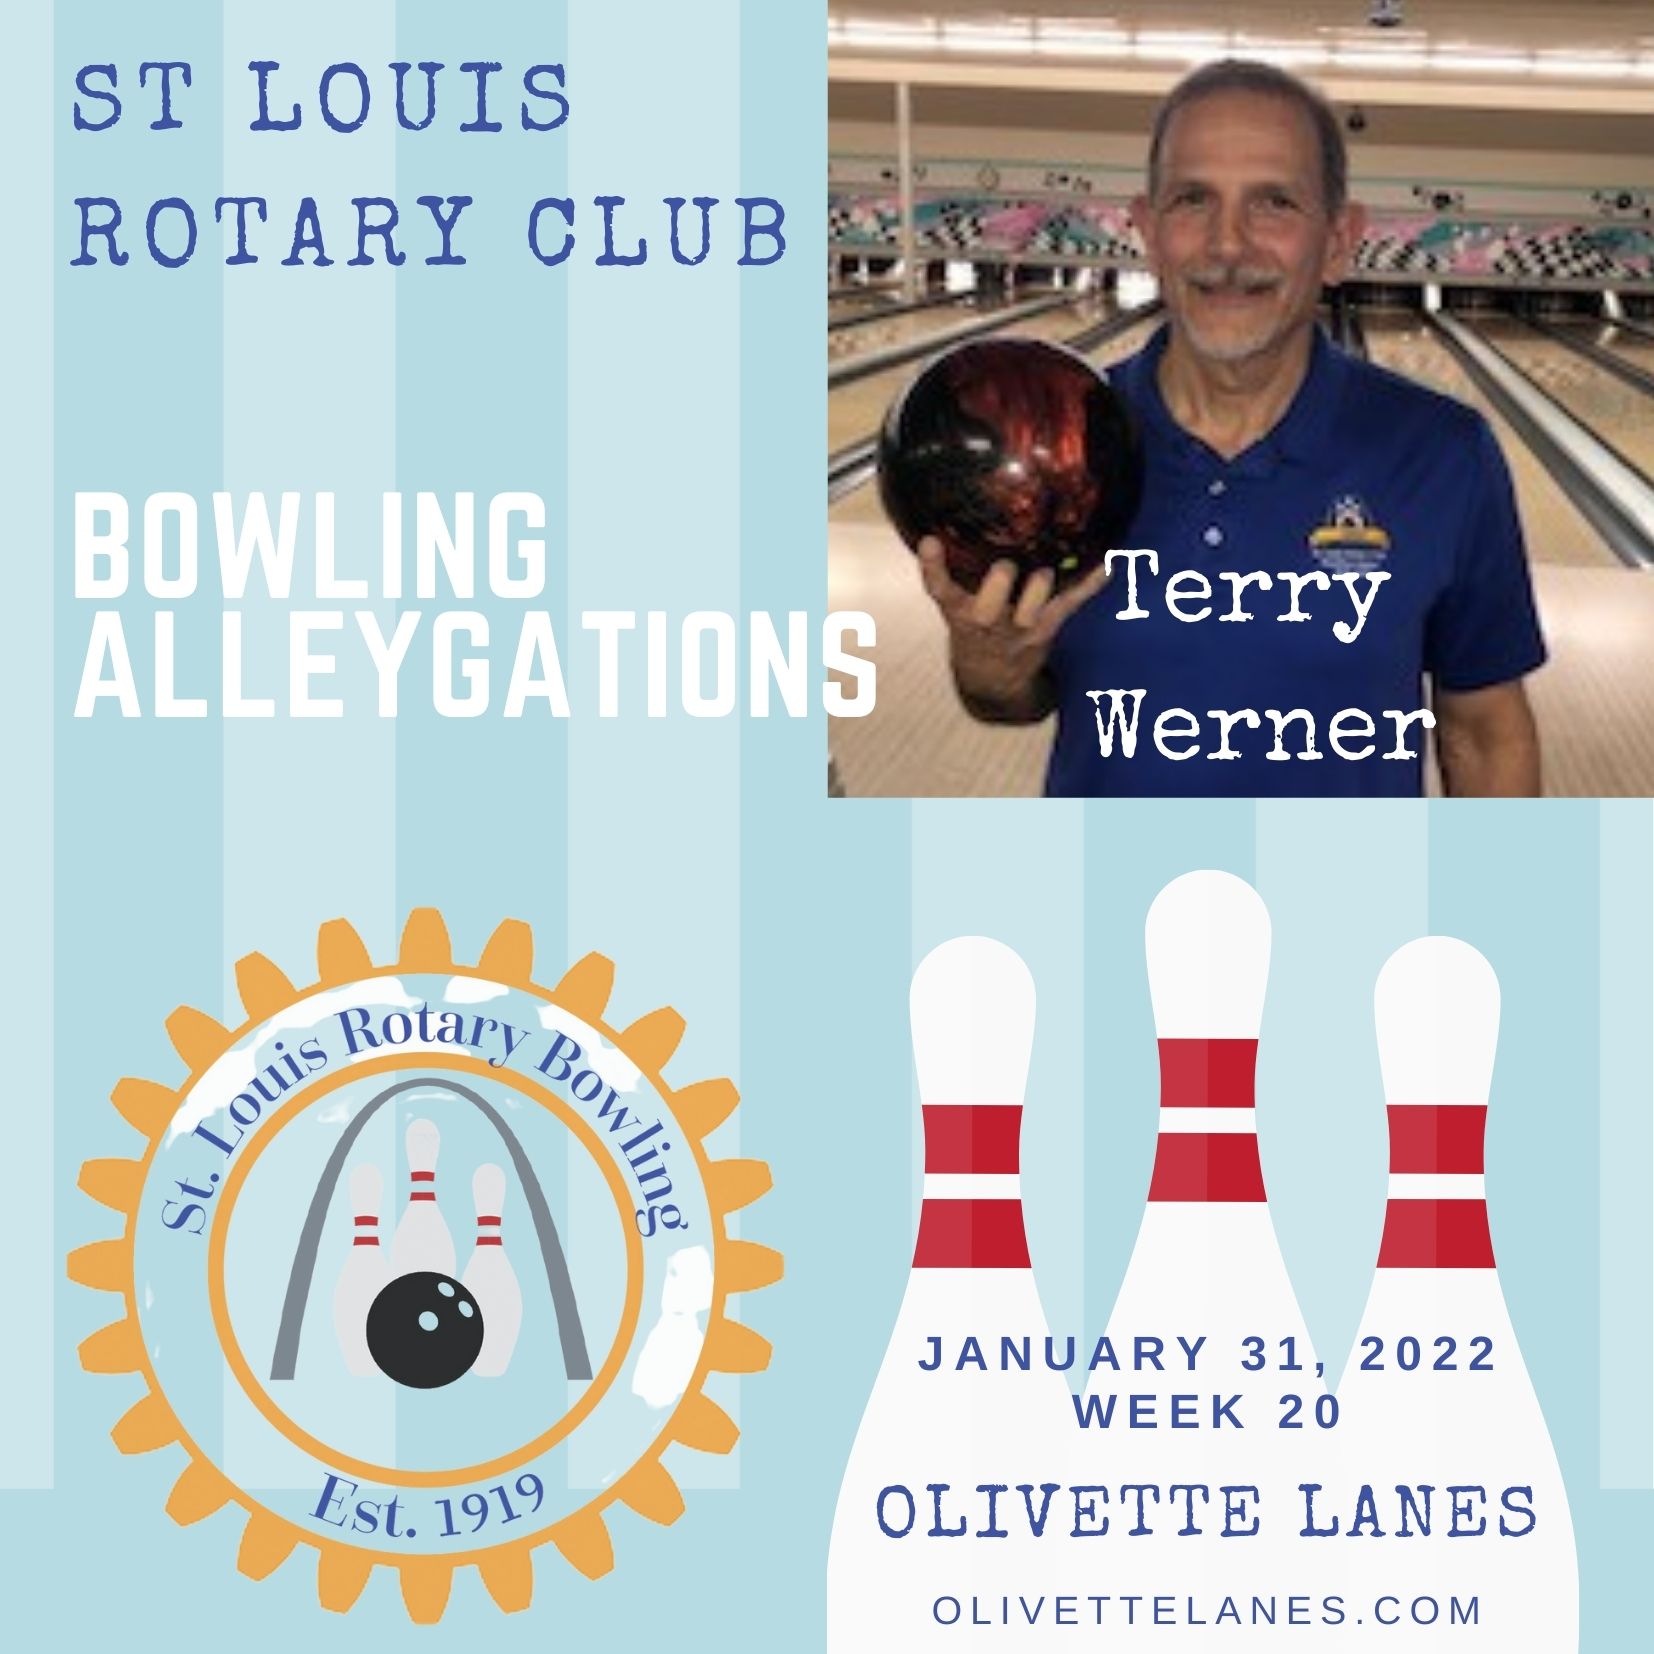 Bowling Alleygations Week 20 1-31-22